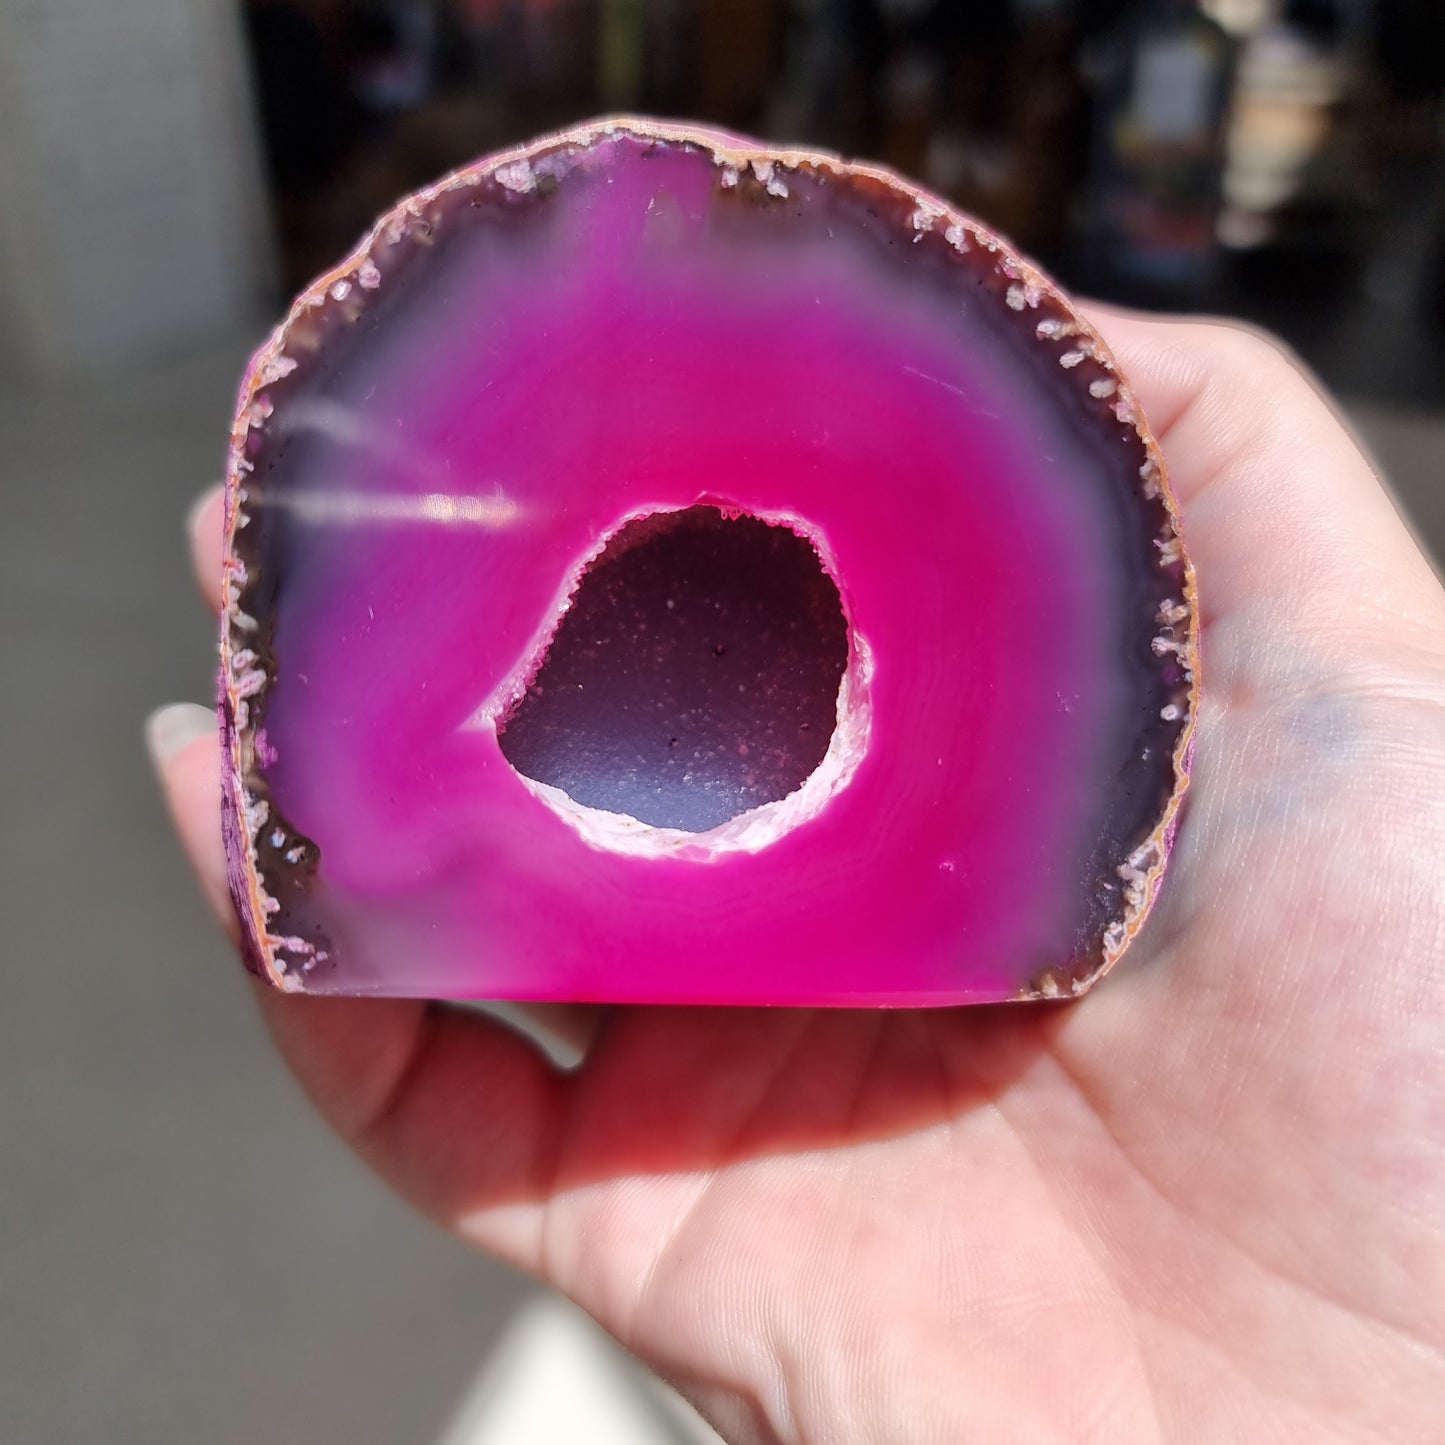 Pink agate with deep pocket - Rivendell Shop